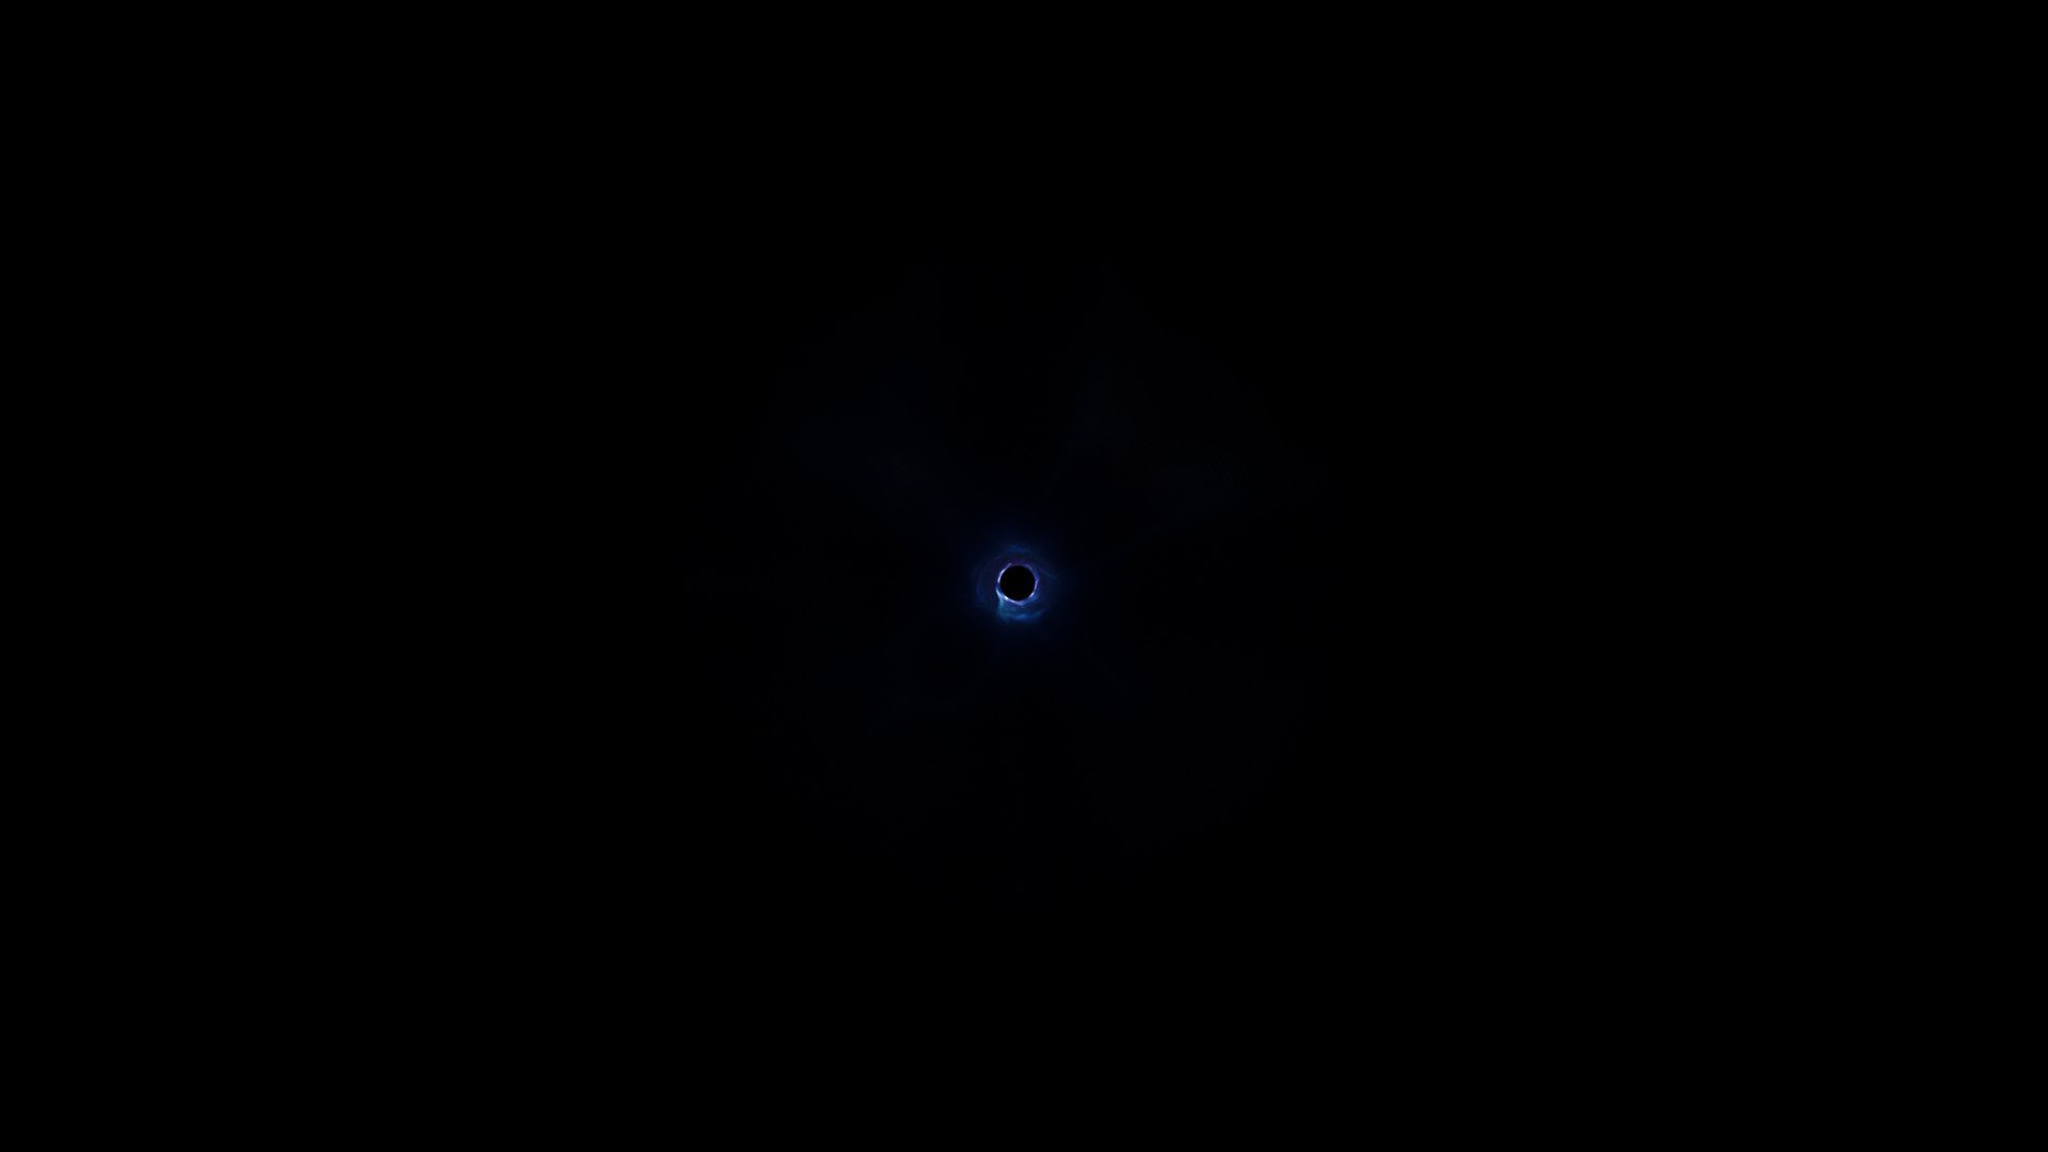 48x1152 Fortnite Black Hole 48x1152 Resolution Wallpaper Hd Games 4k Wallpapers Images Photos And Background